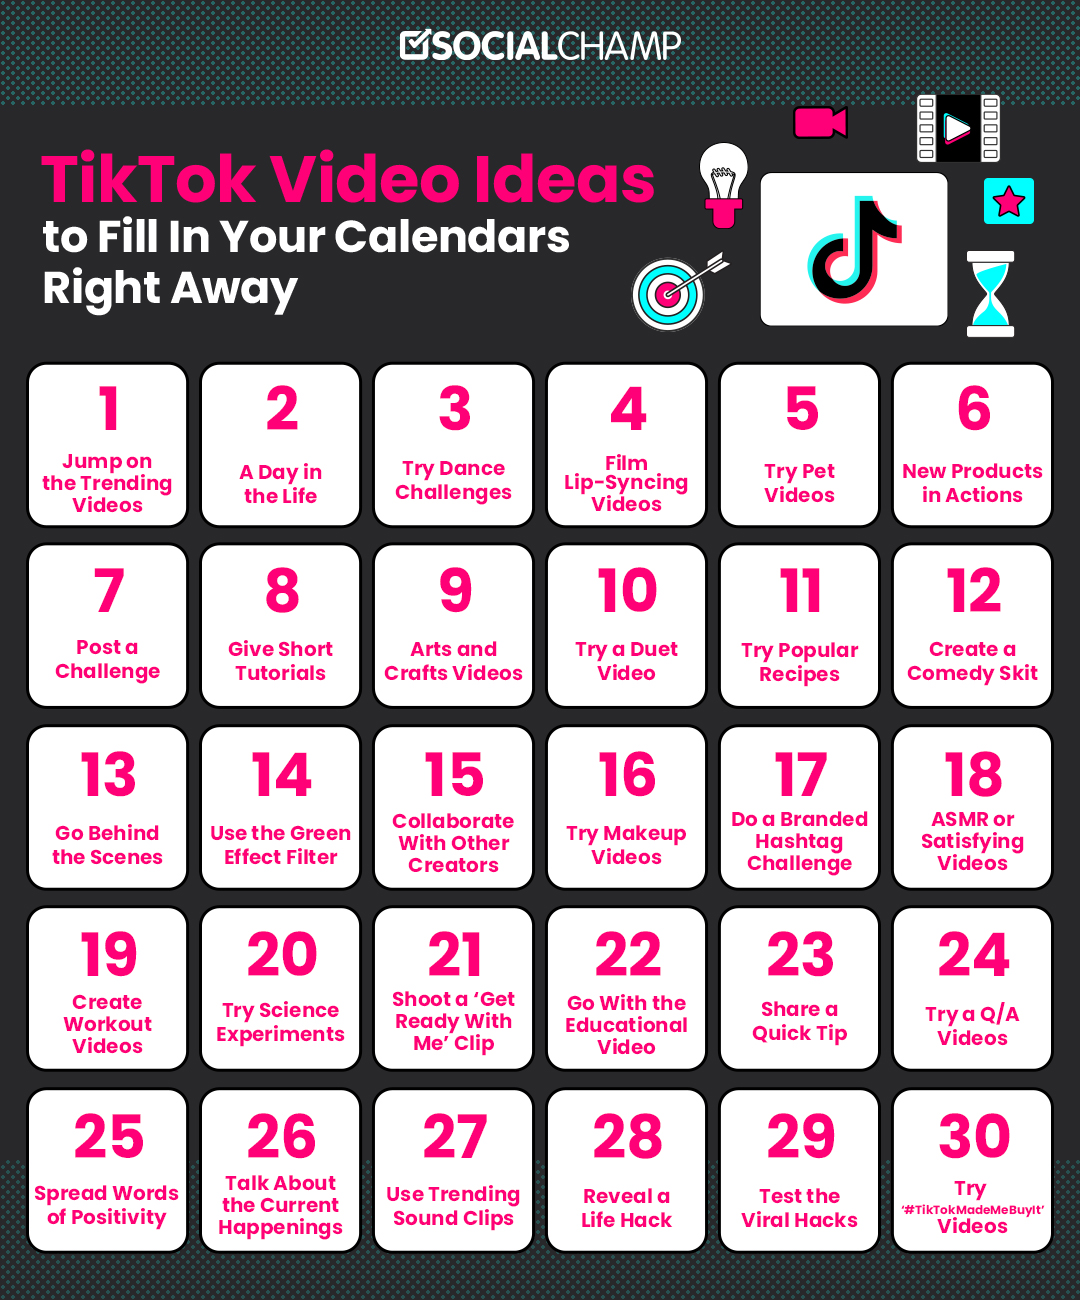 10 Basic Tips for Editing Your Next Viral TikTok Video